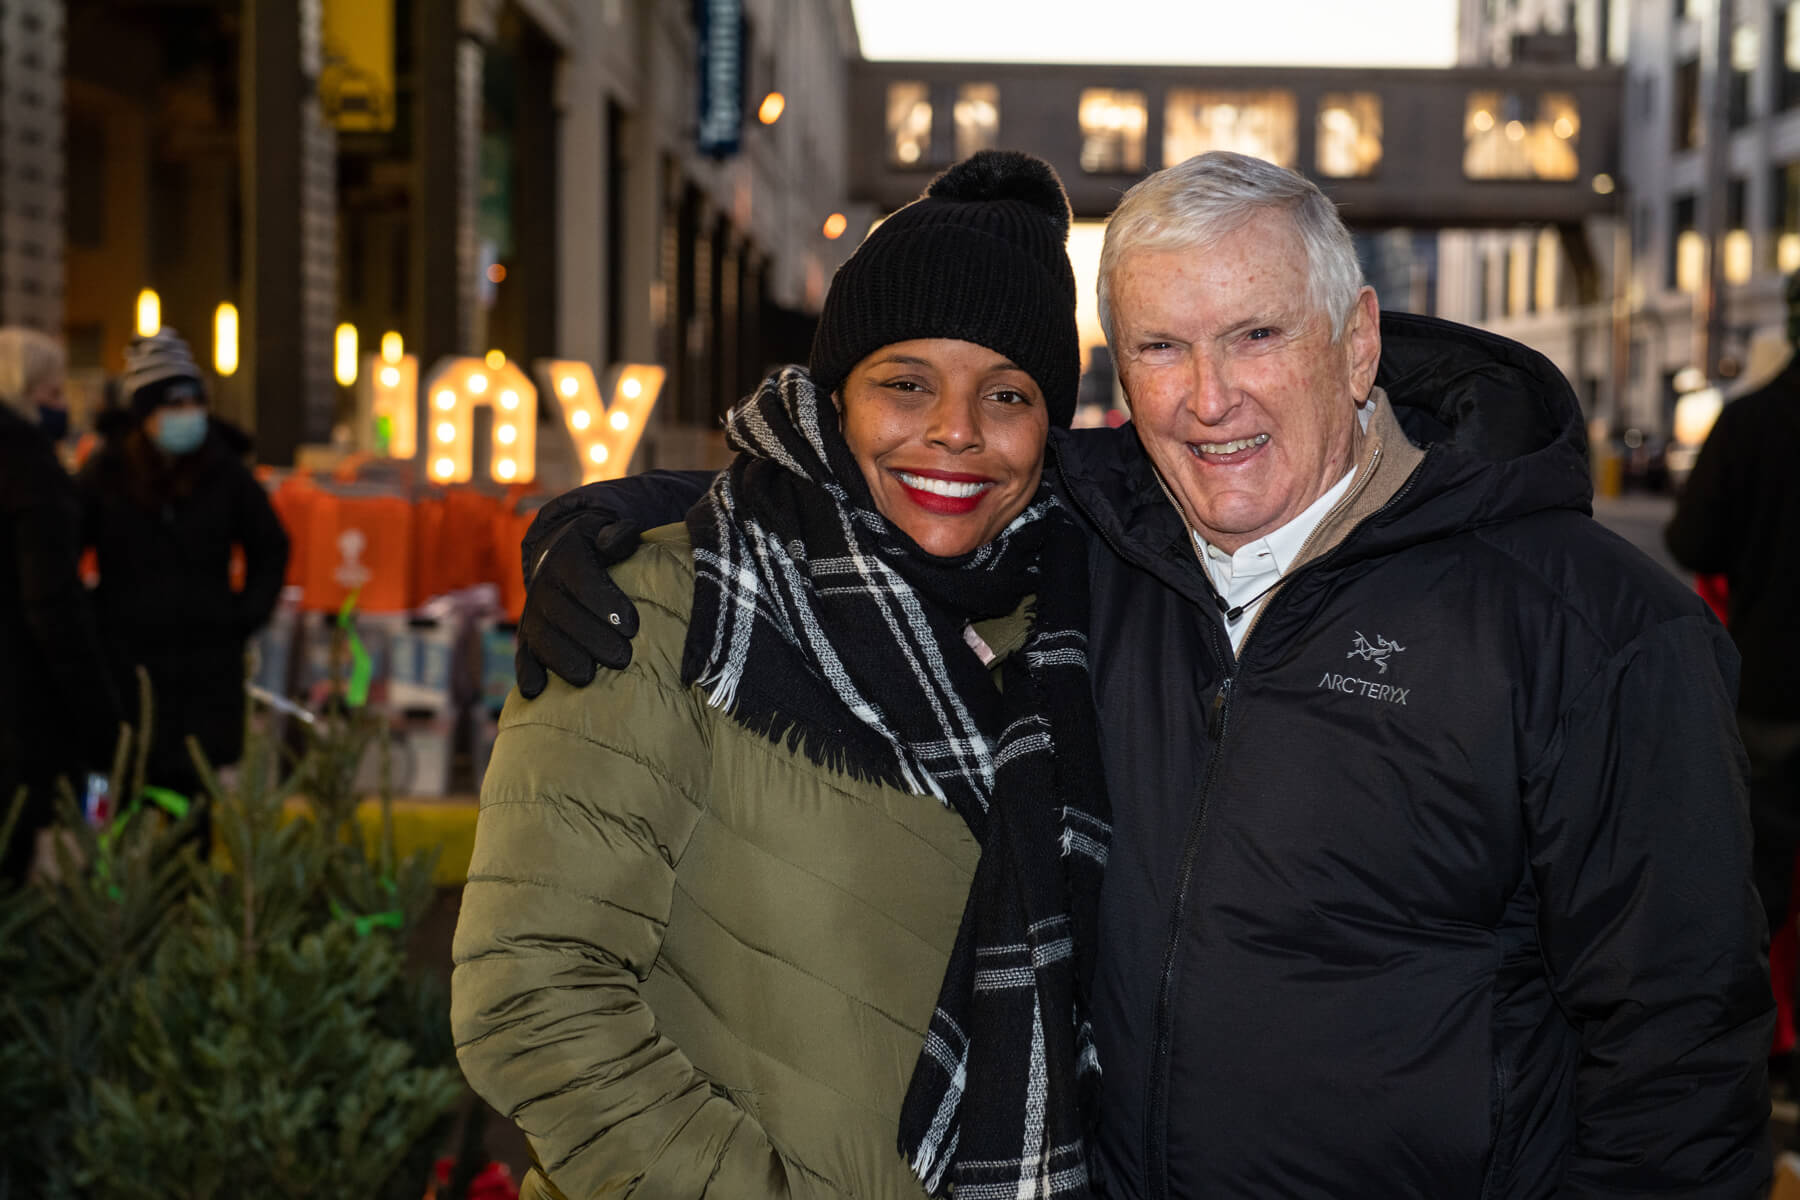 Jack Connors and Lisa Fortenberry at the Holiday Assistance giveaway